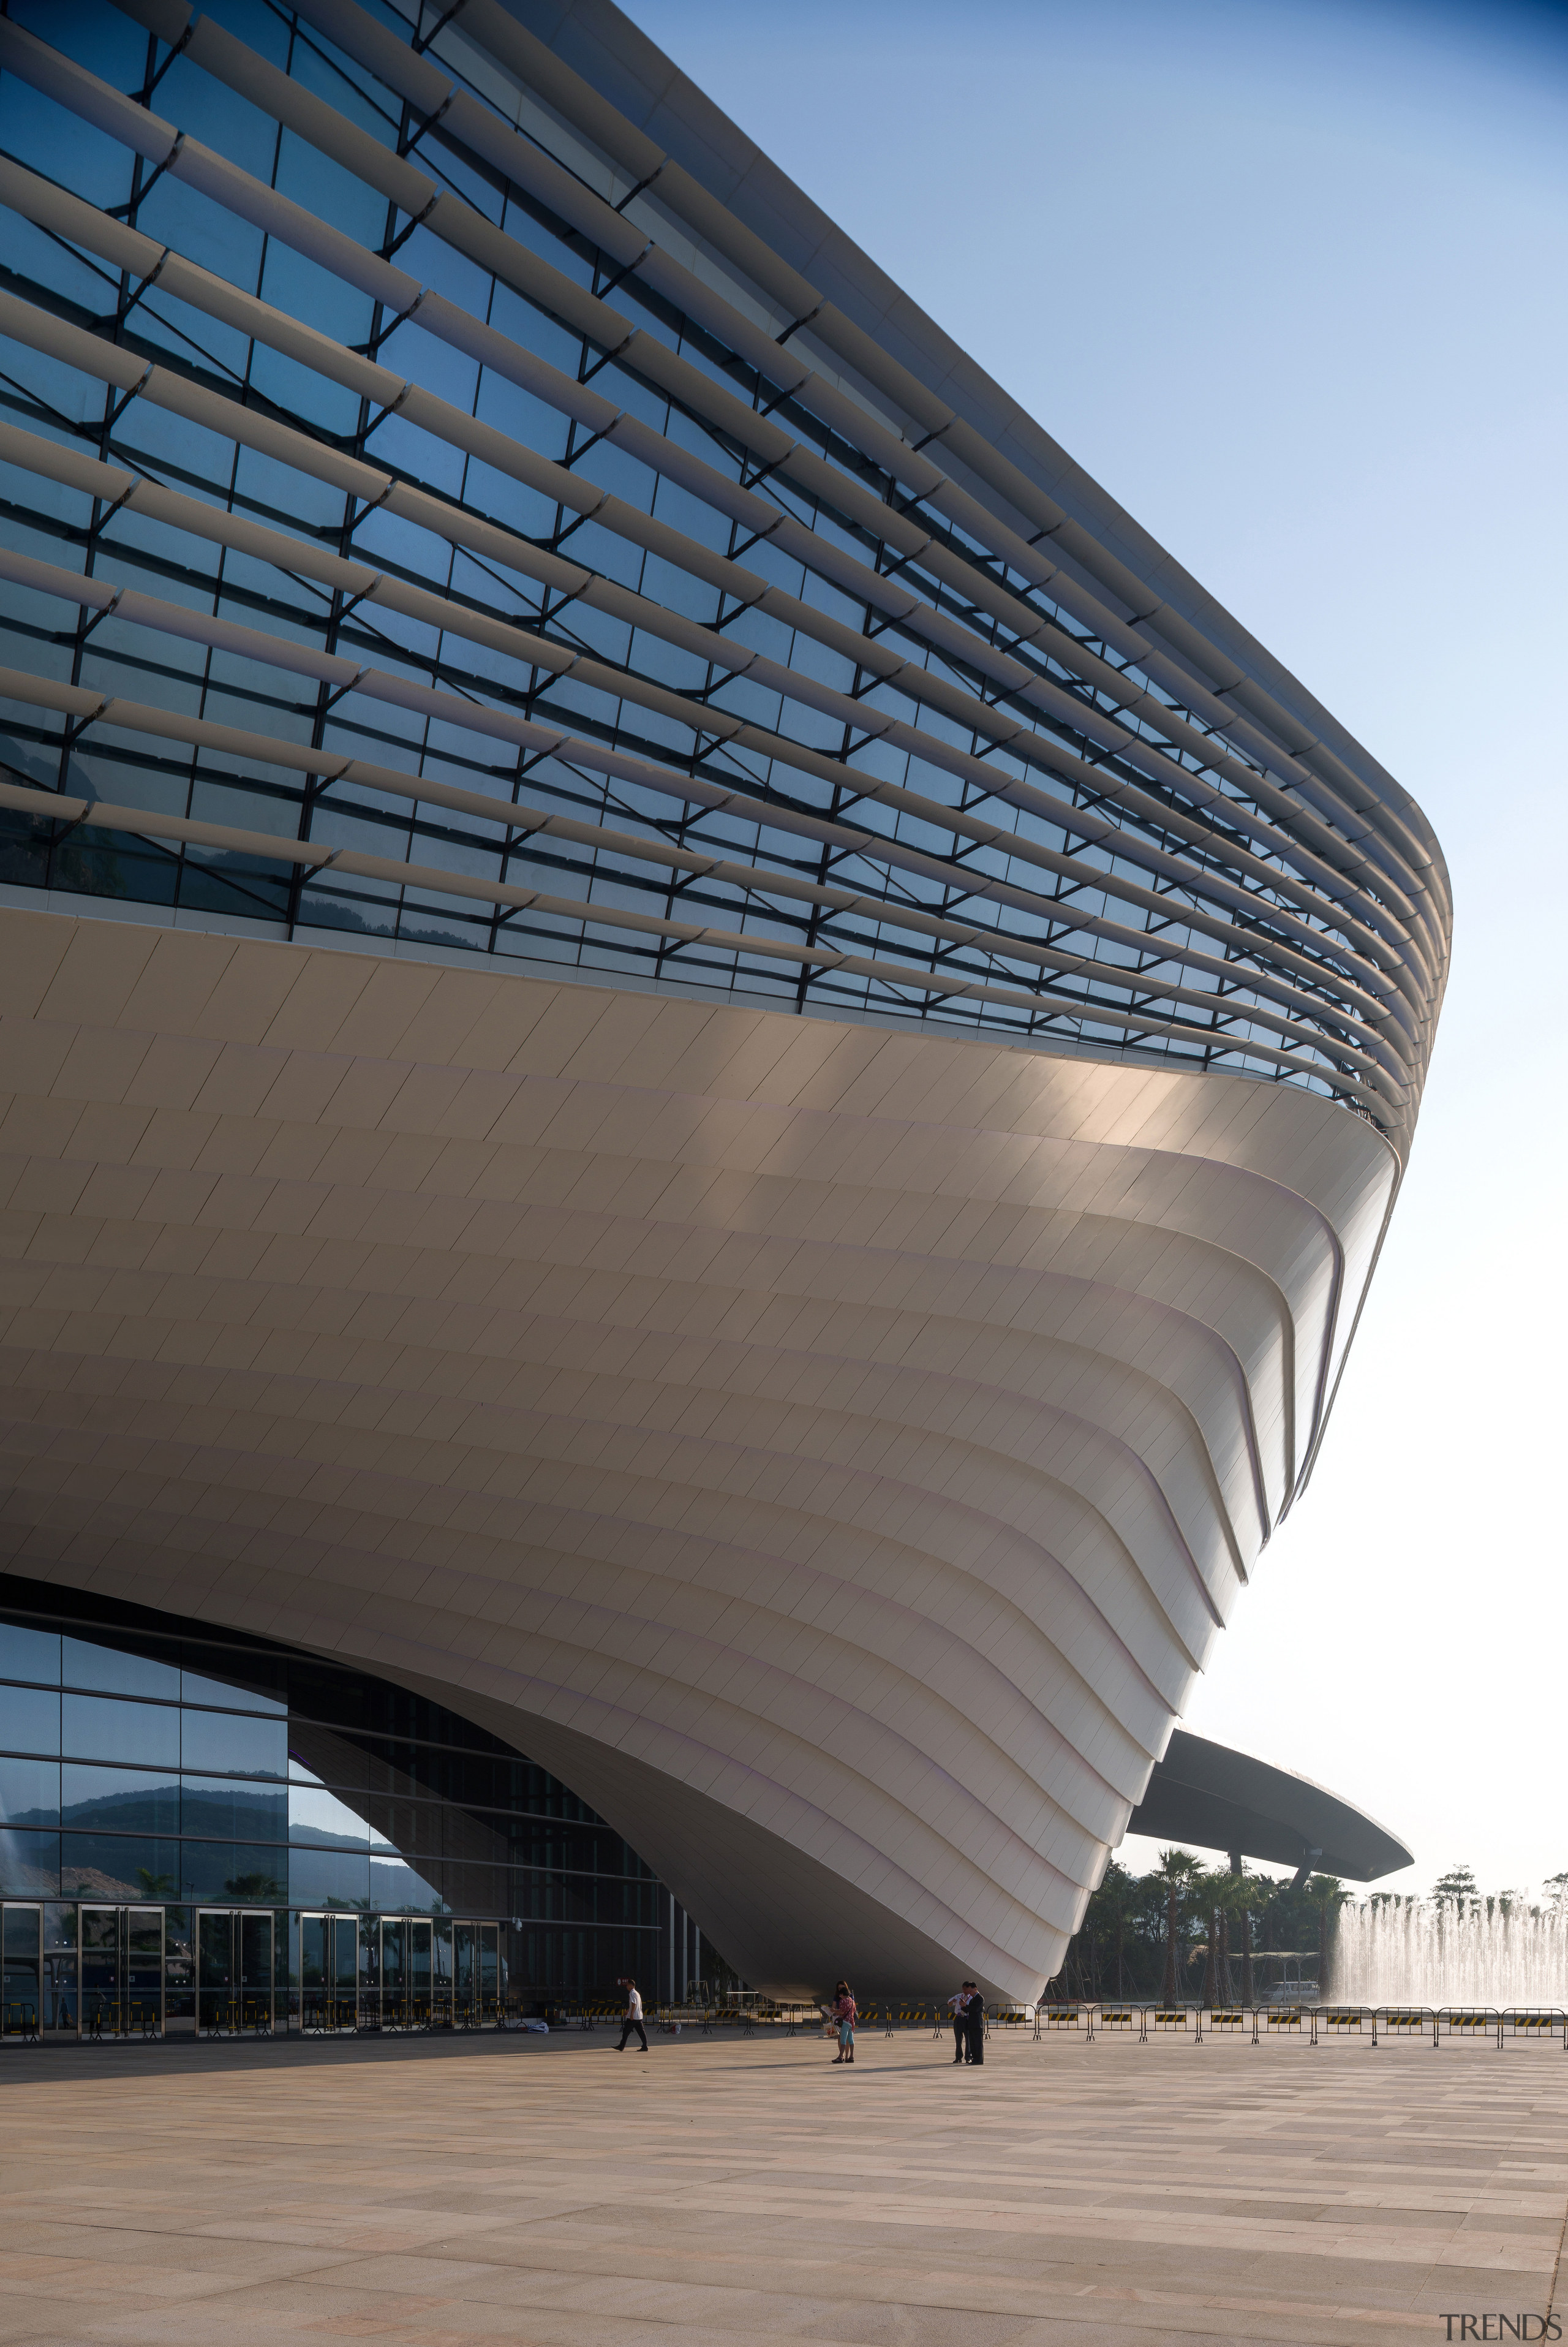 An architectural ribbon winds around the Zhuhai International architecture, building, convention center, corporate headquarters, daylighting, daytime, facade, fixed link, headquarters, landmark, line, metropolitan area, roof, sky, skyscraper, structure, gray